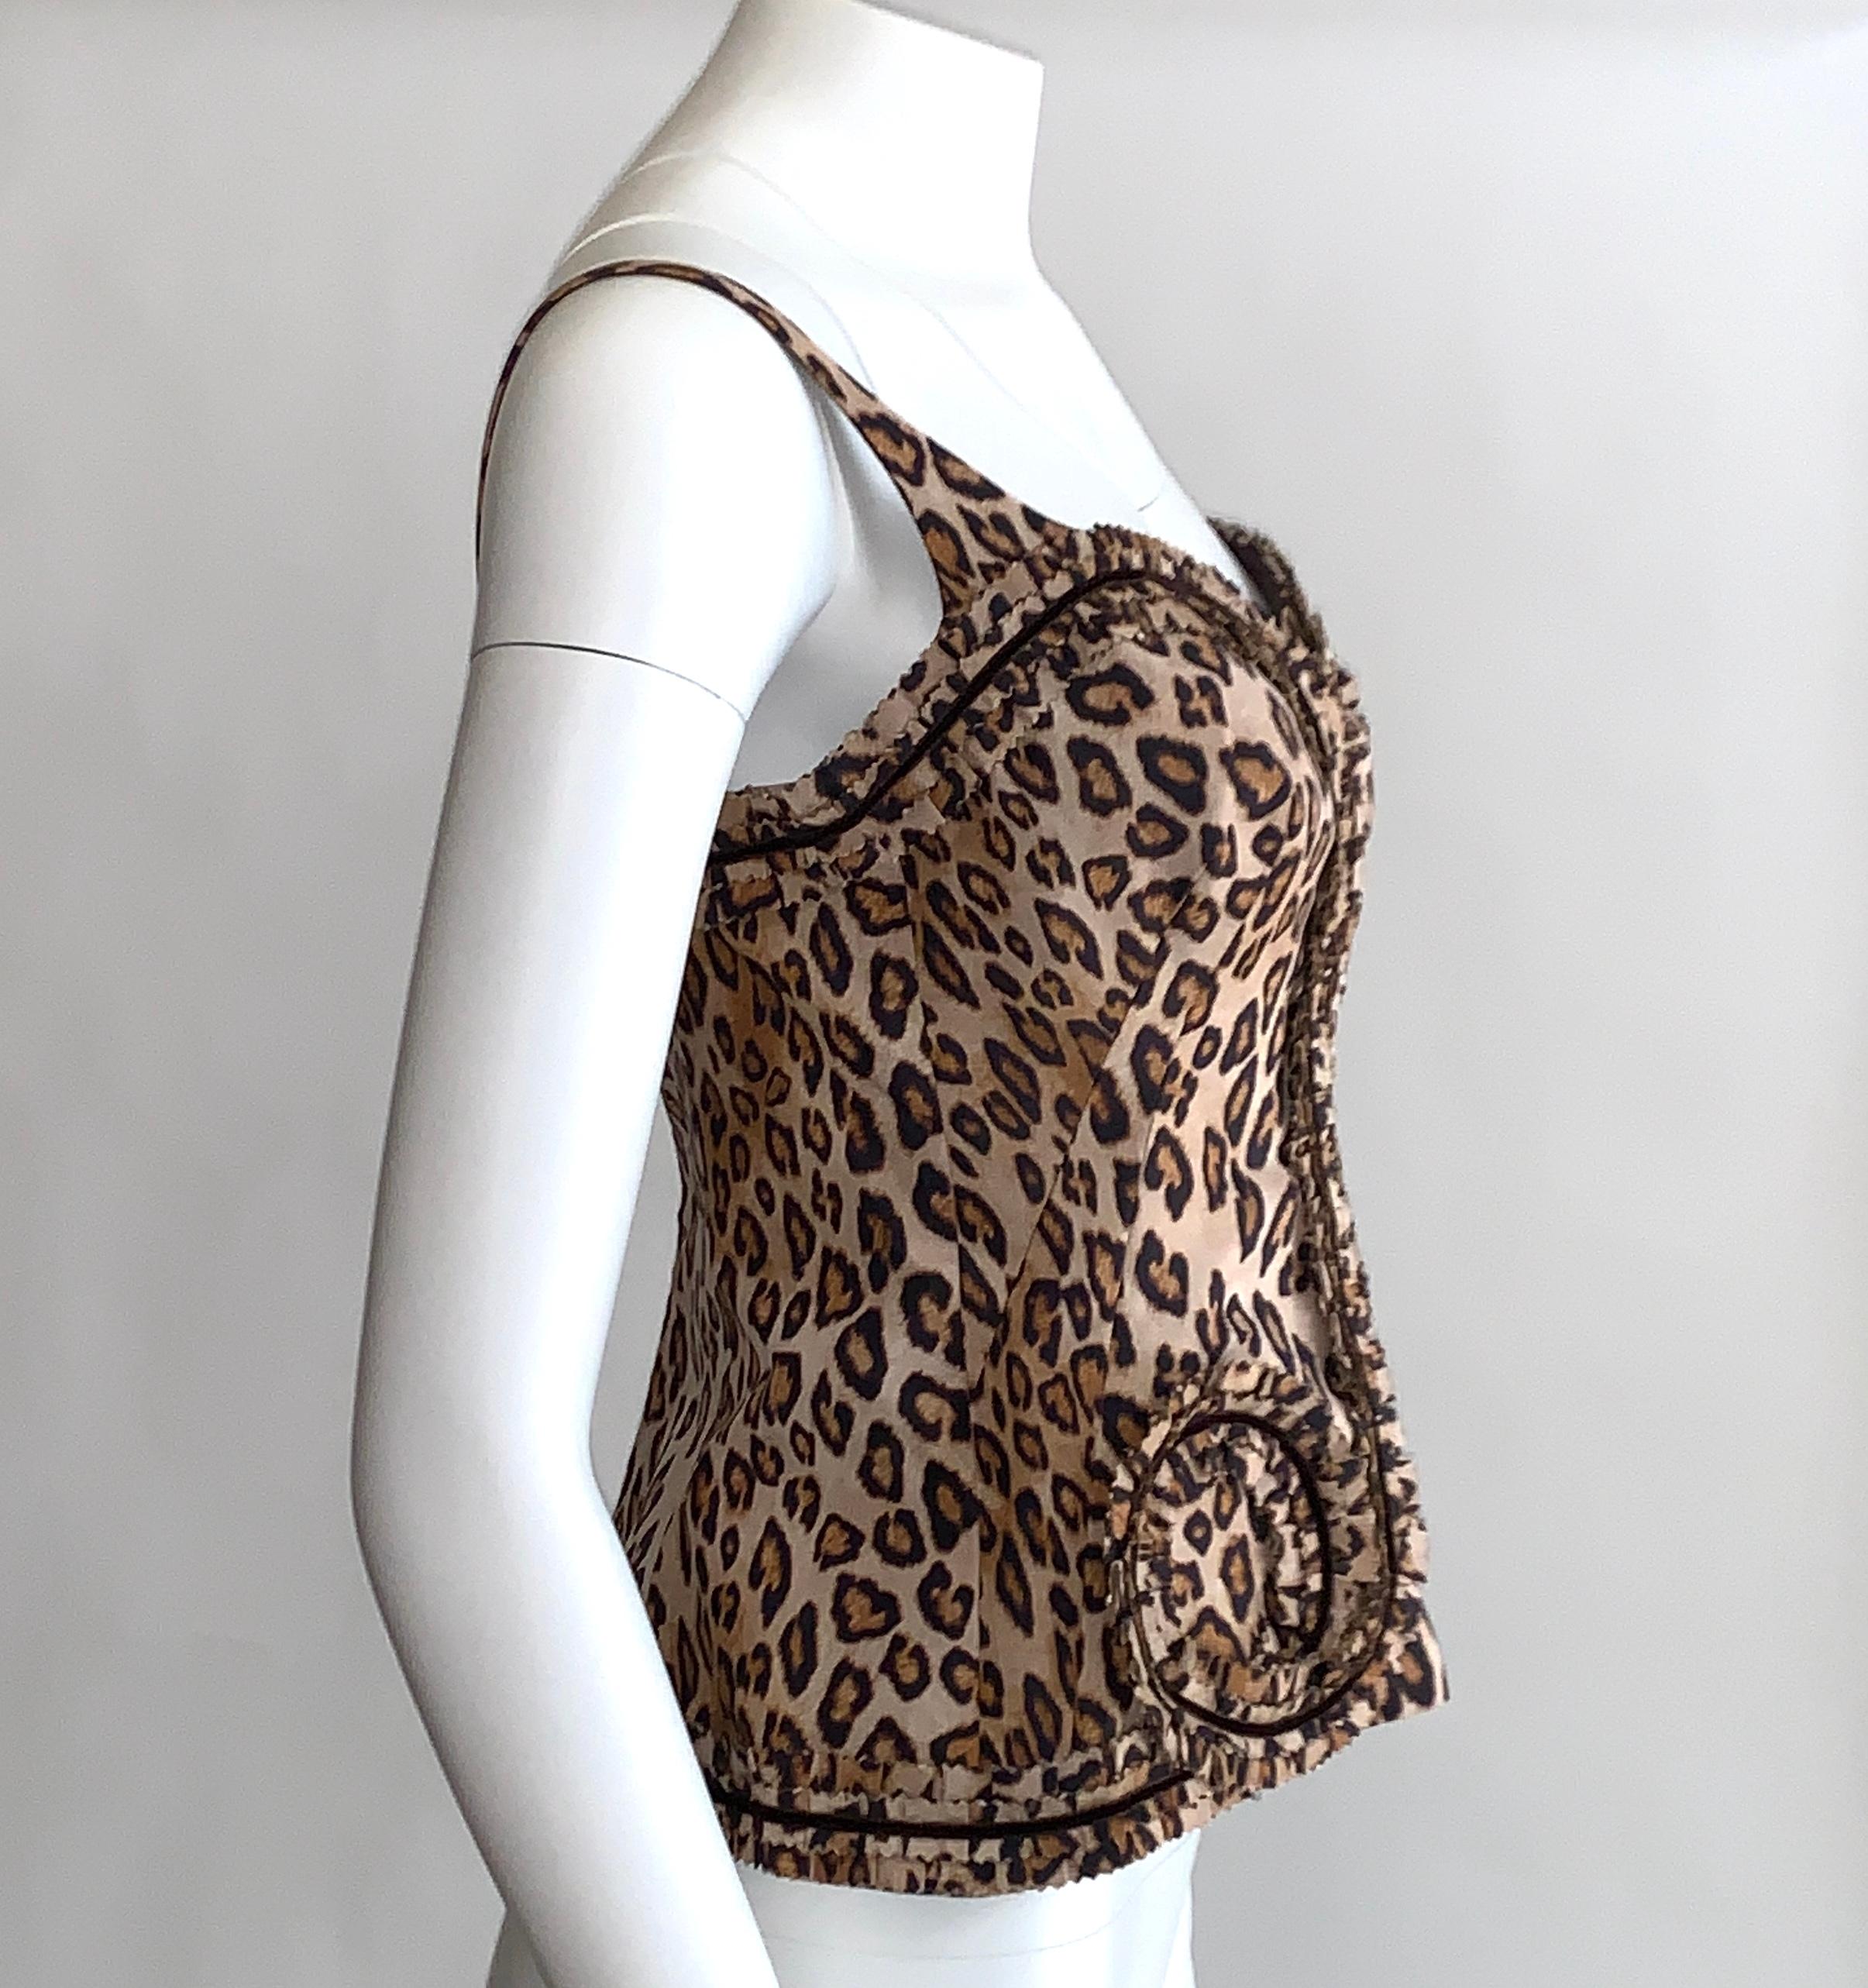 Alexander McQueen leopard print corset style top featuring leopard trim swirl detail with pinked or zig zag edges and velvet accents. Built in bra top with underwire. Back zip and hook and eye. 

From the Fall 2005 Hitchcock inspired collection 'The